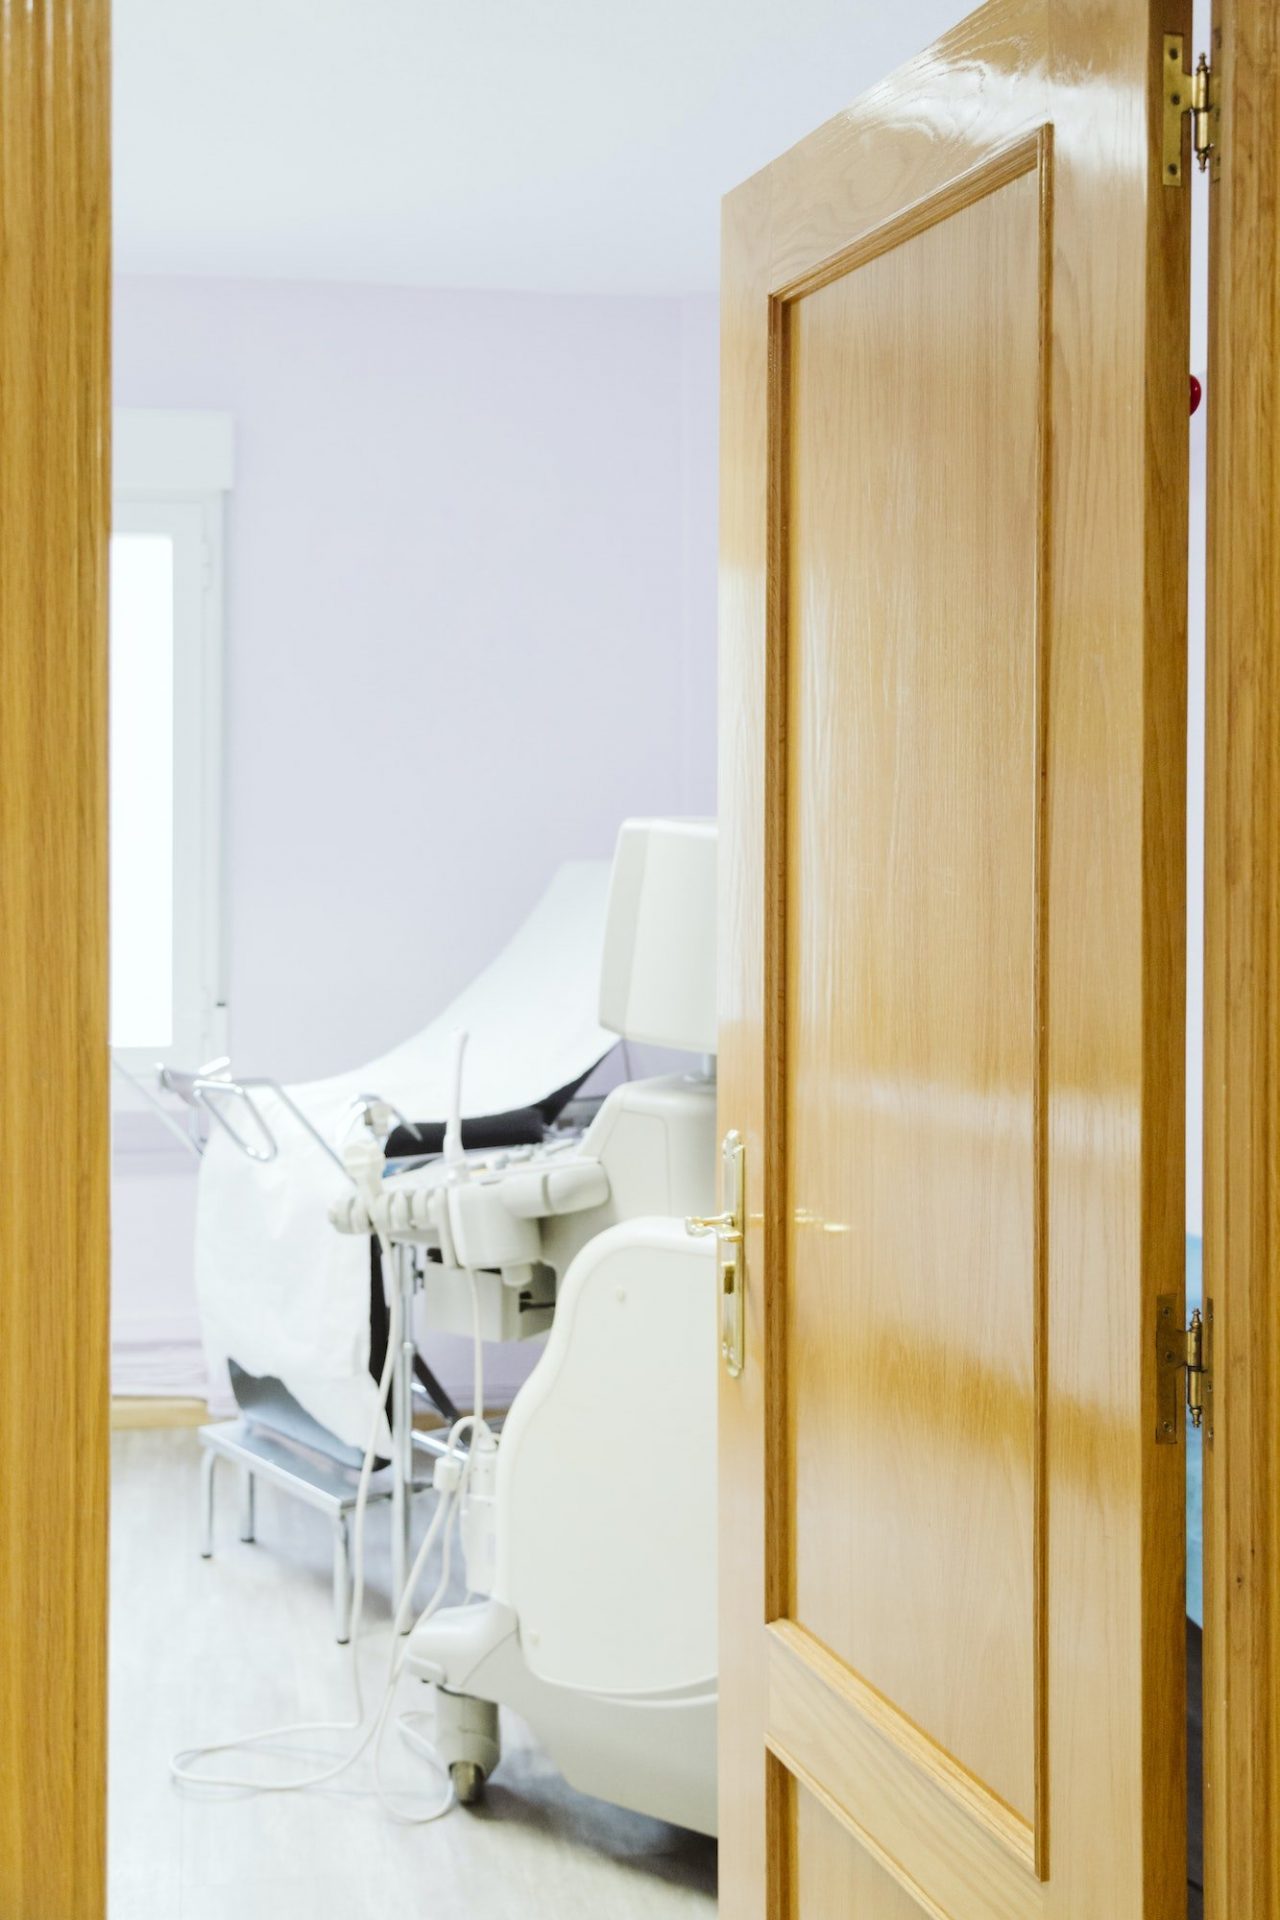 Chair in gynecological room. Daytime. Medical concept indoors. nobody